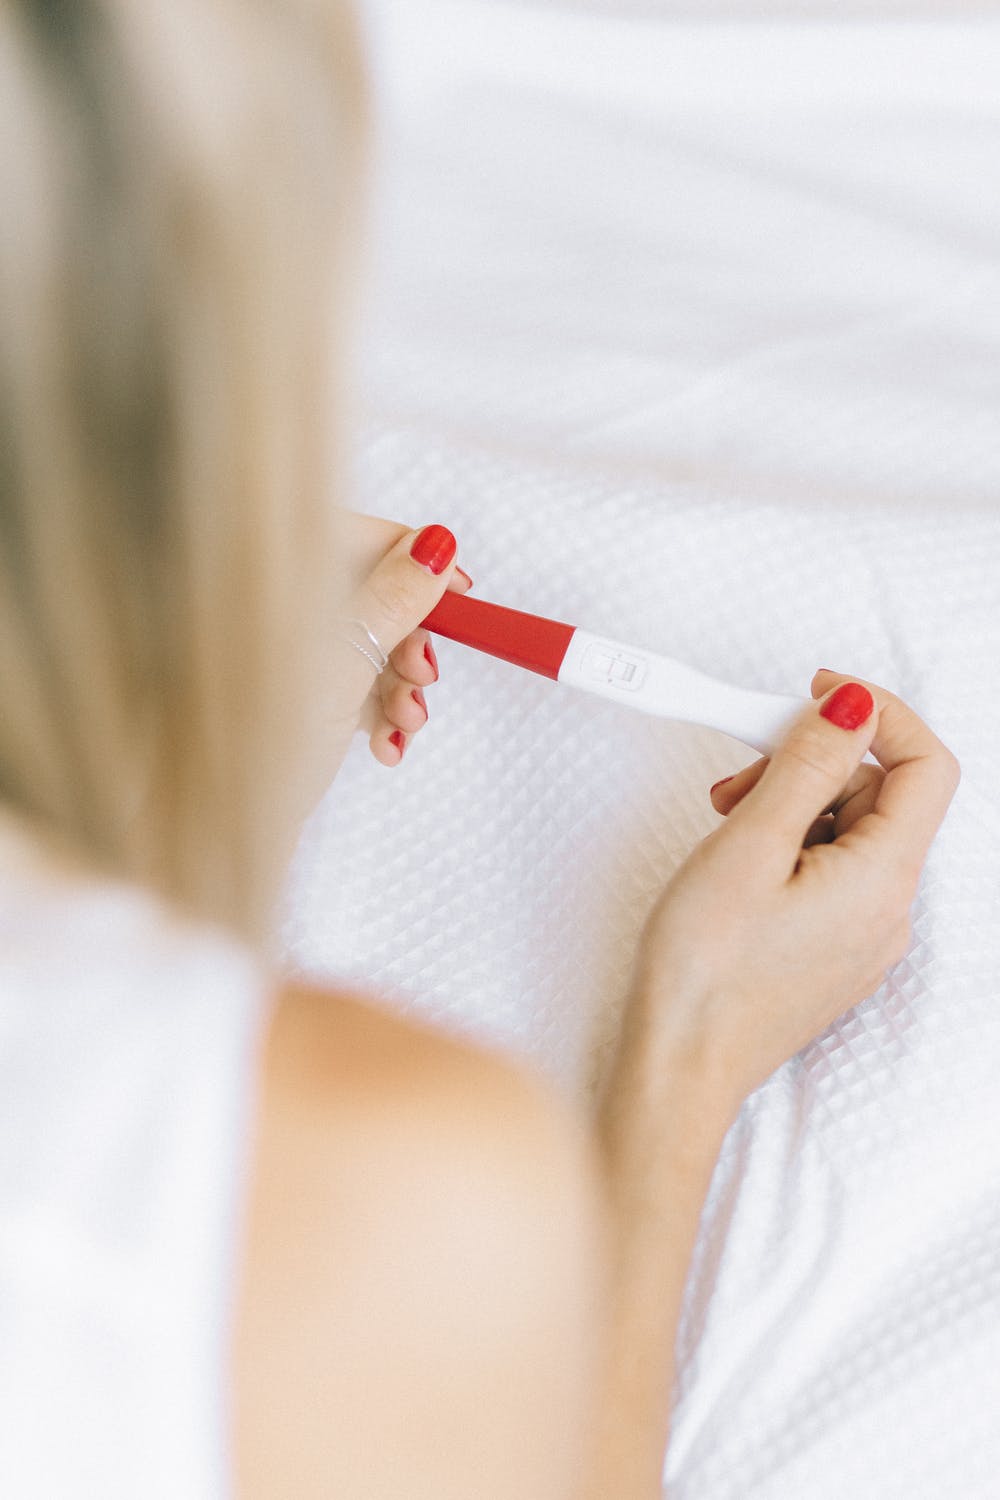 woman with pregnancy test |  Source: Pexels